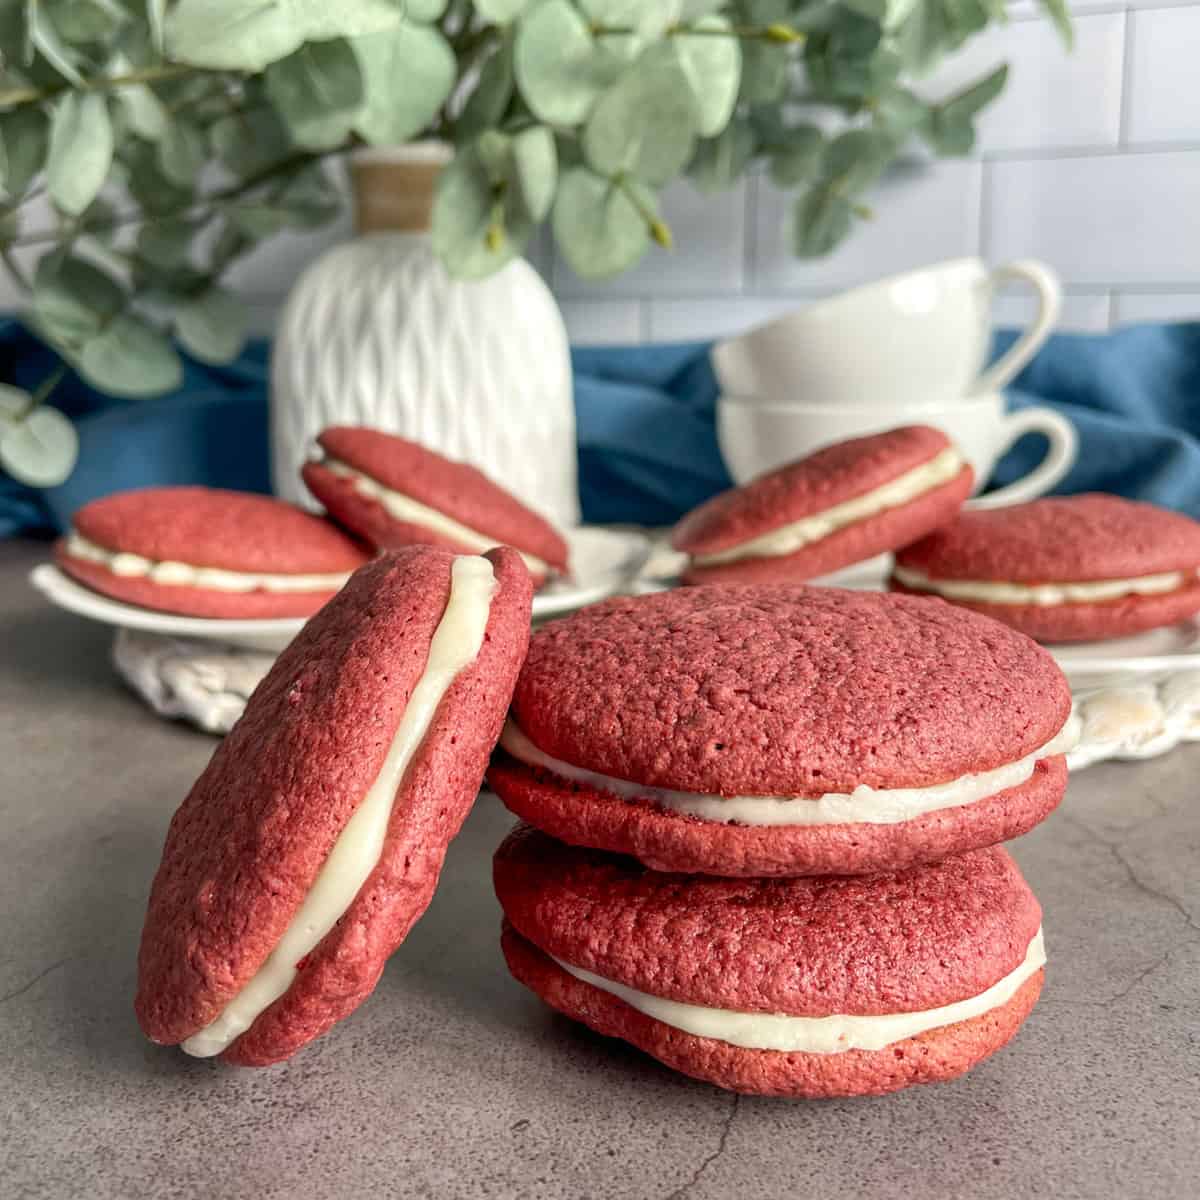 A stack of red velvet whoopie pies with cream cheese frosting in front of white and blue decor